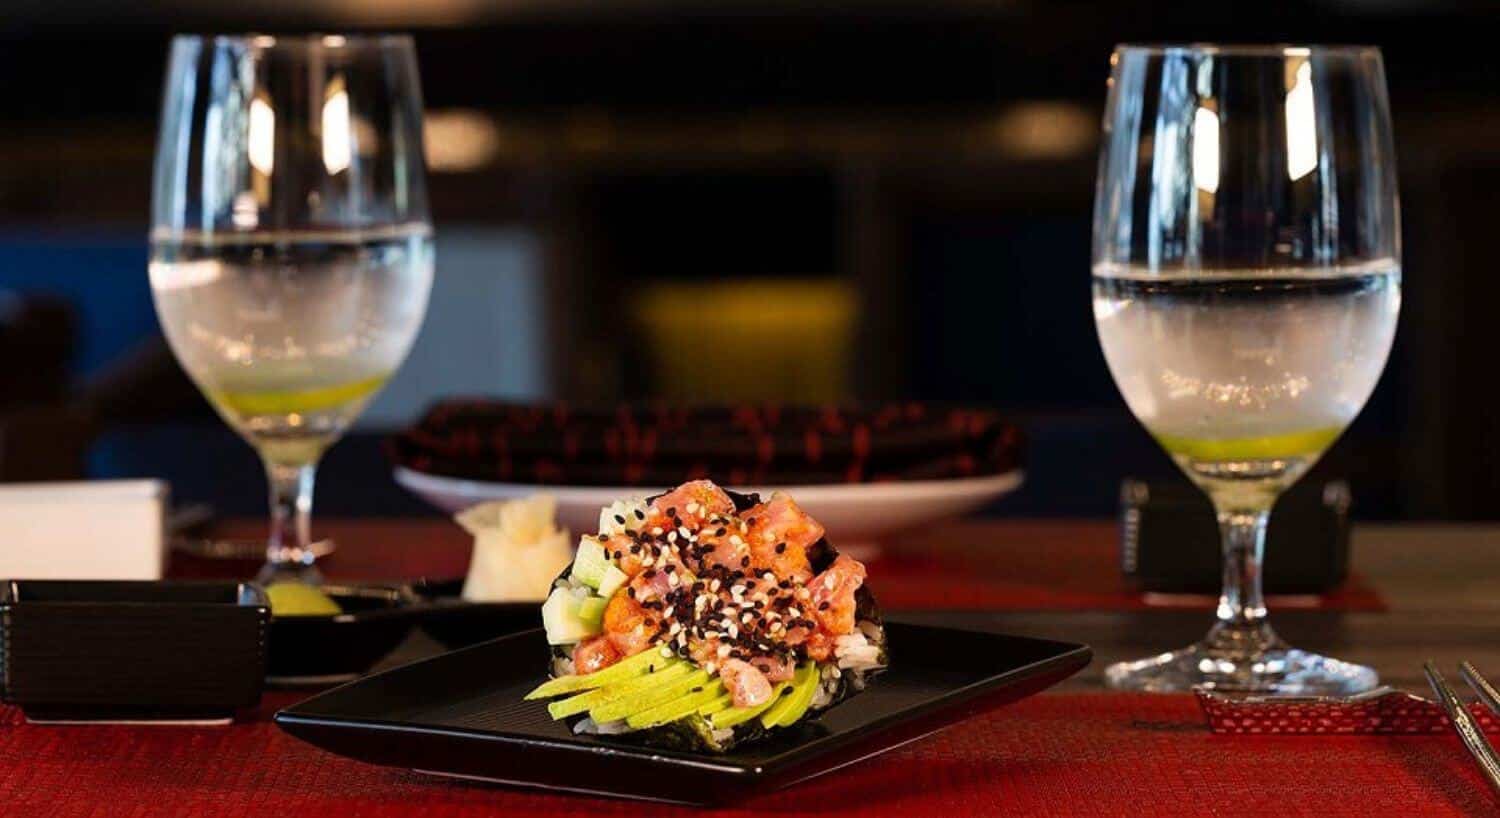 A square black plate on a red placemat with slices of avocado, tuna pieces, and white and black sesame seeds; with two glasses of ice water with lime slices.